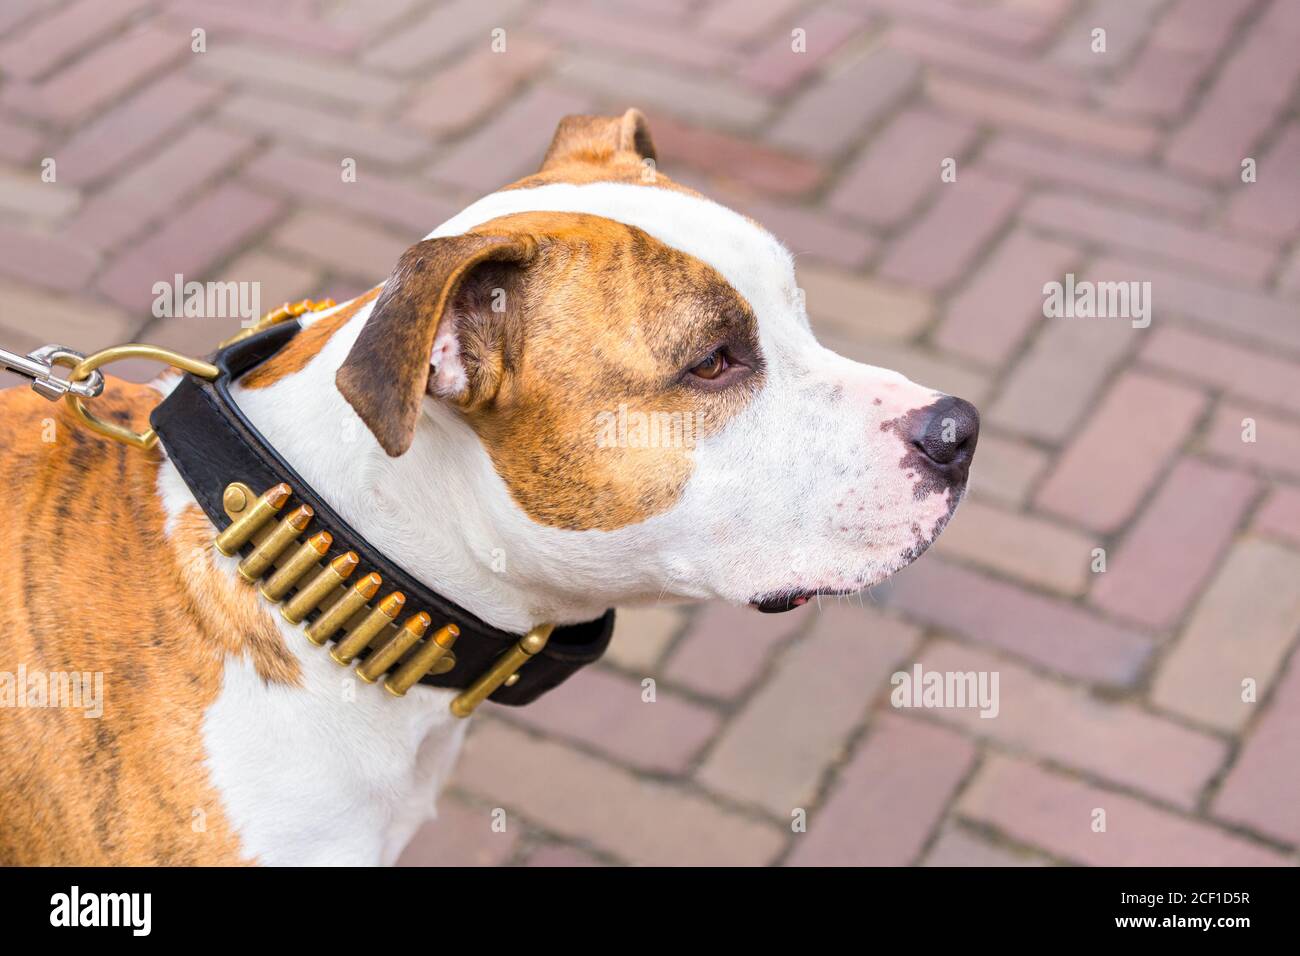 Portrait of Staffordshire terrier dog with bullets on collar Stock Photo